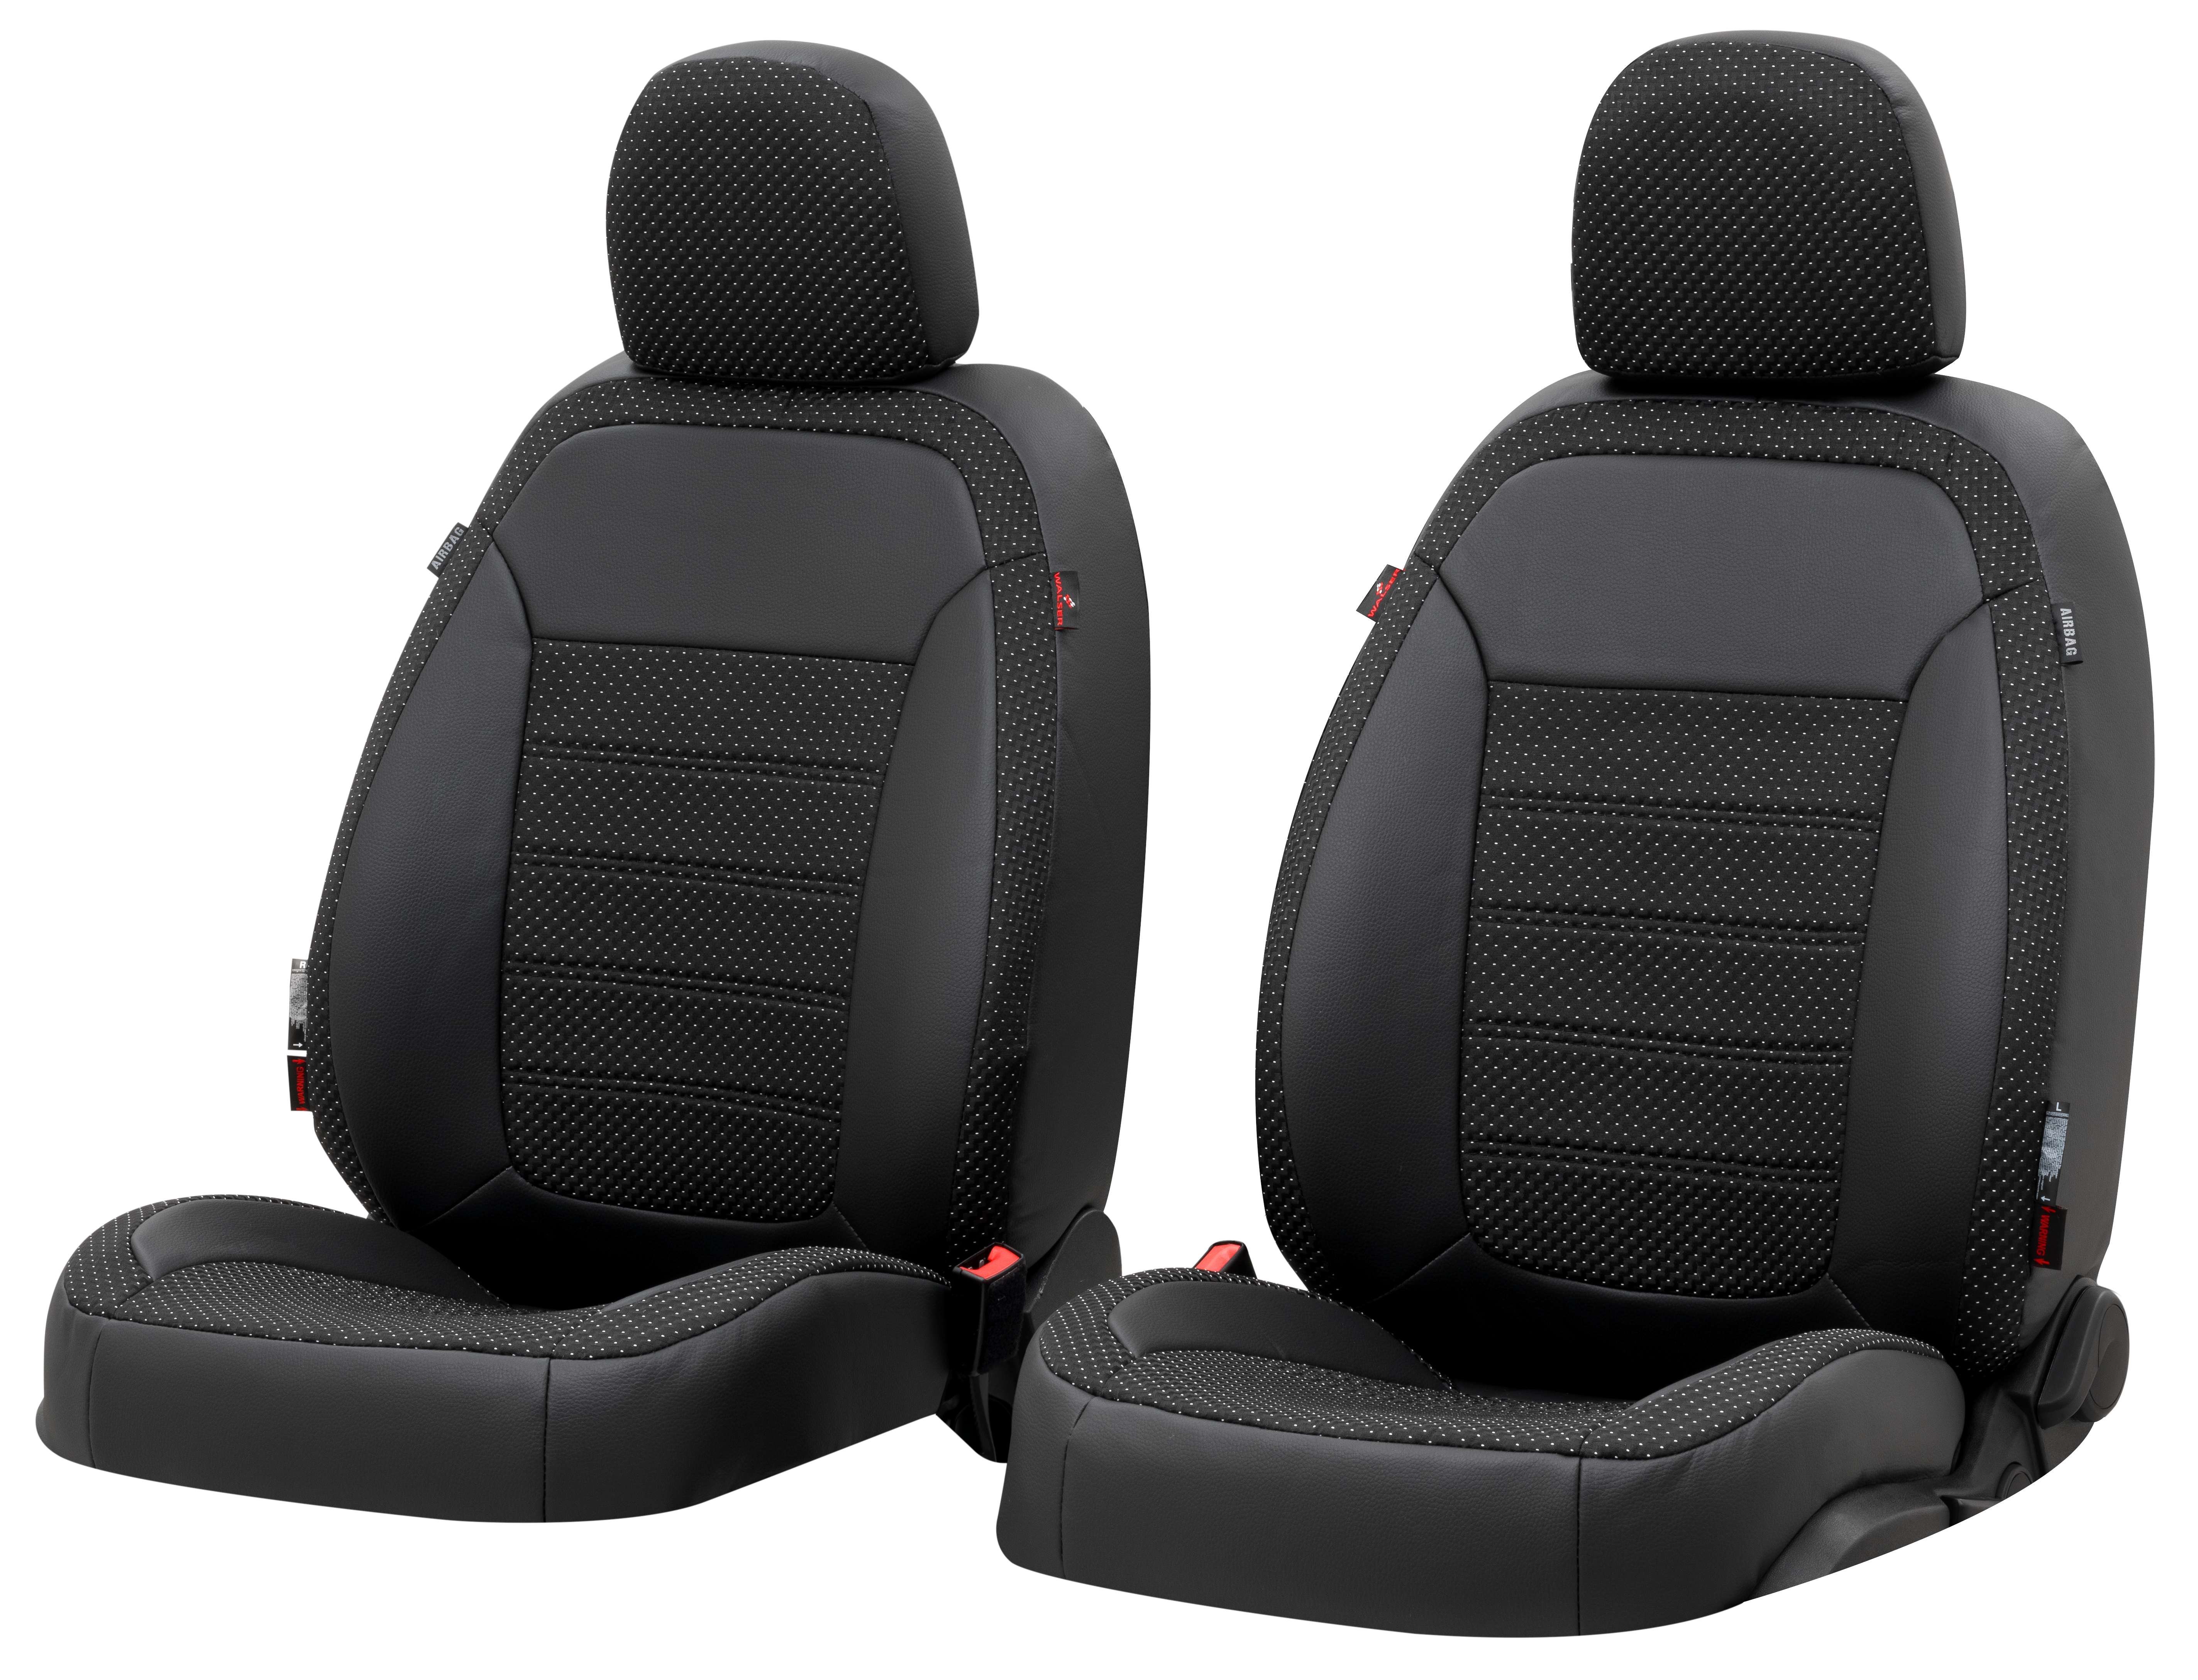 Custom-Fit car seat cover 'Torino' for Skoda Fabia from 2015 to present - 2 single seat covers for standard seats